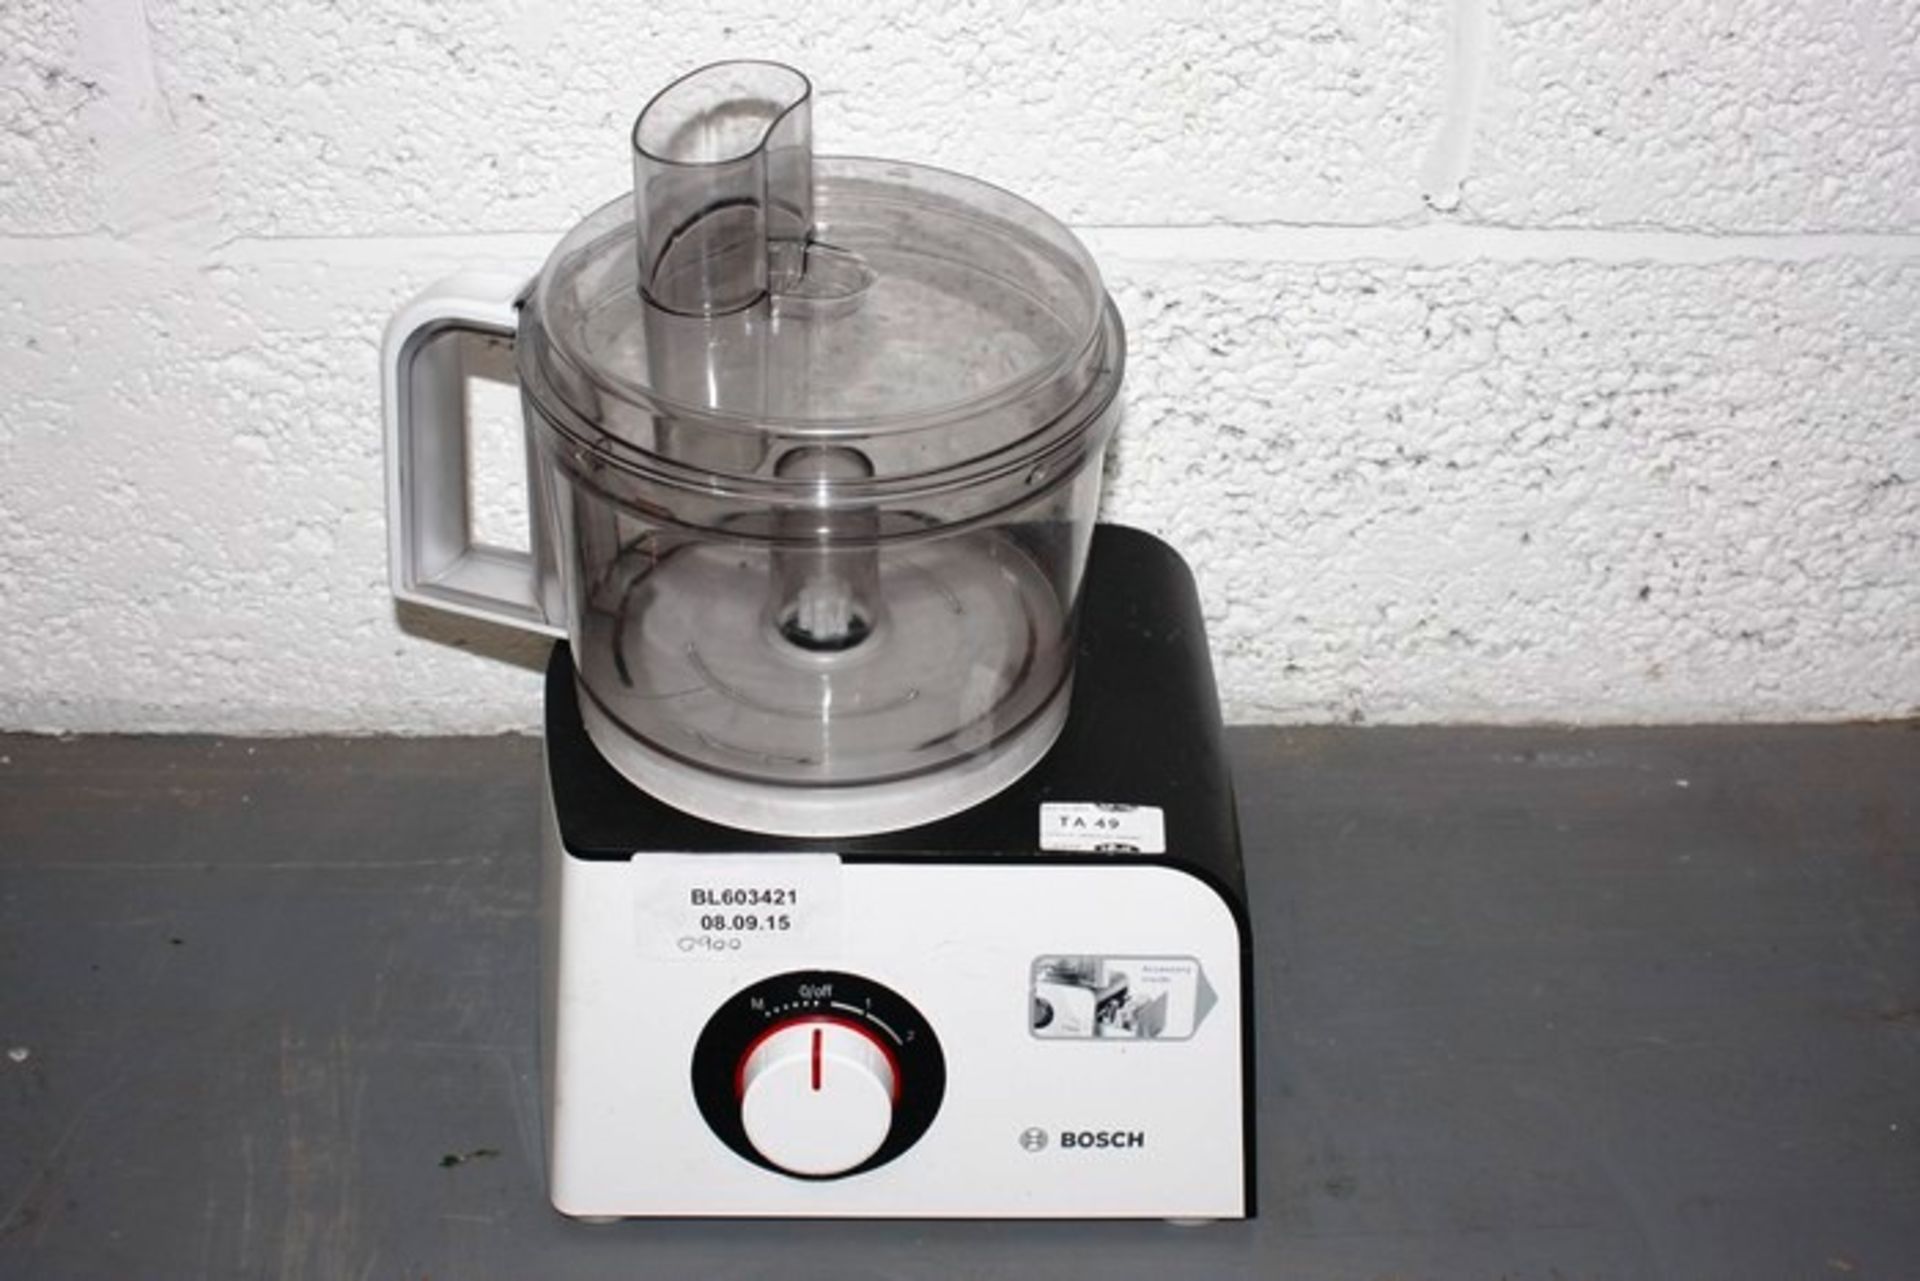 BOSCH MULTIPRO COMPACT FOOD PROCESSOR TO INCLUDE ATTACHMENTS RRP: £90, BL603421 08/09/15